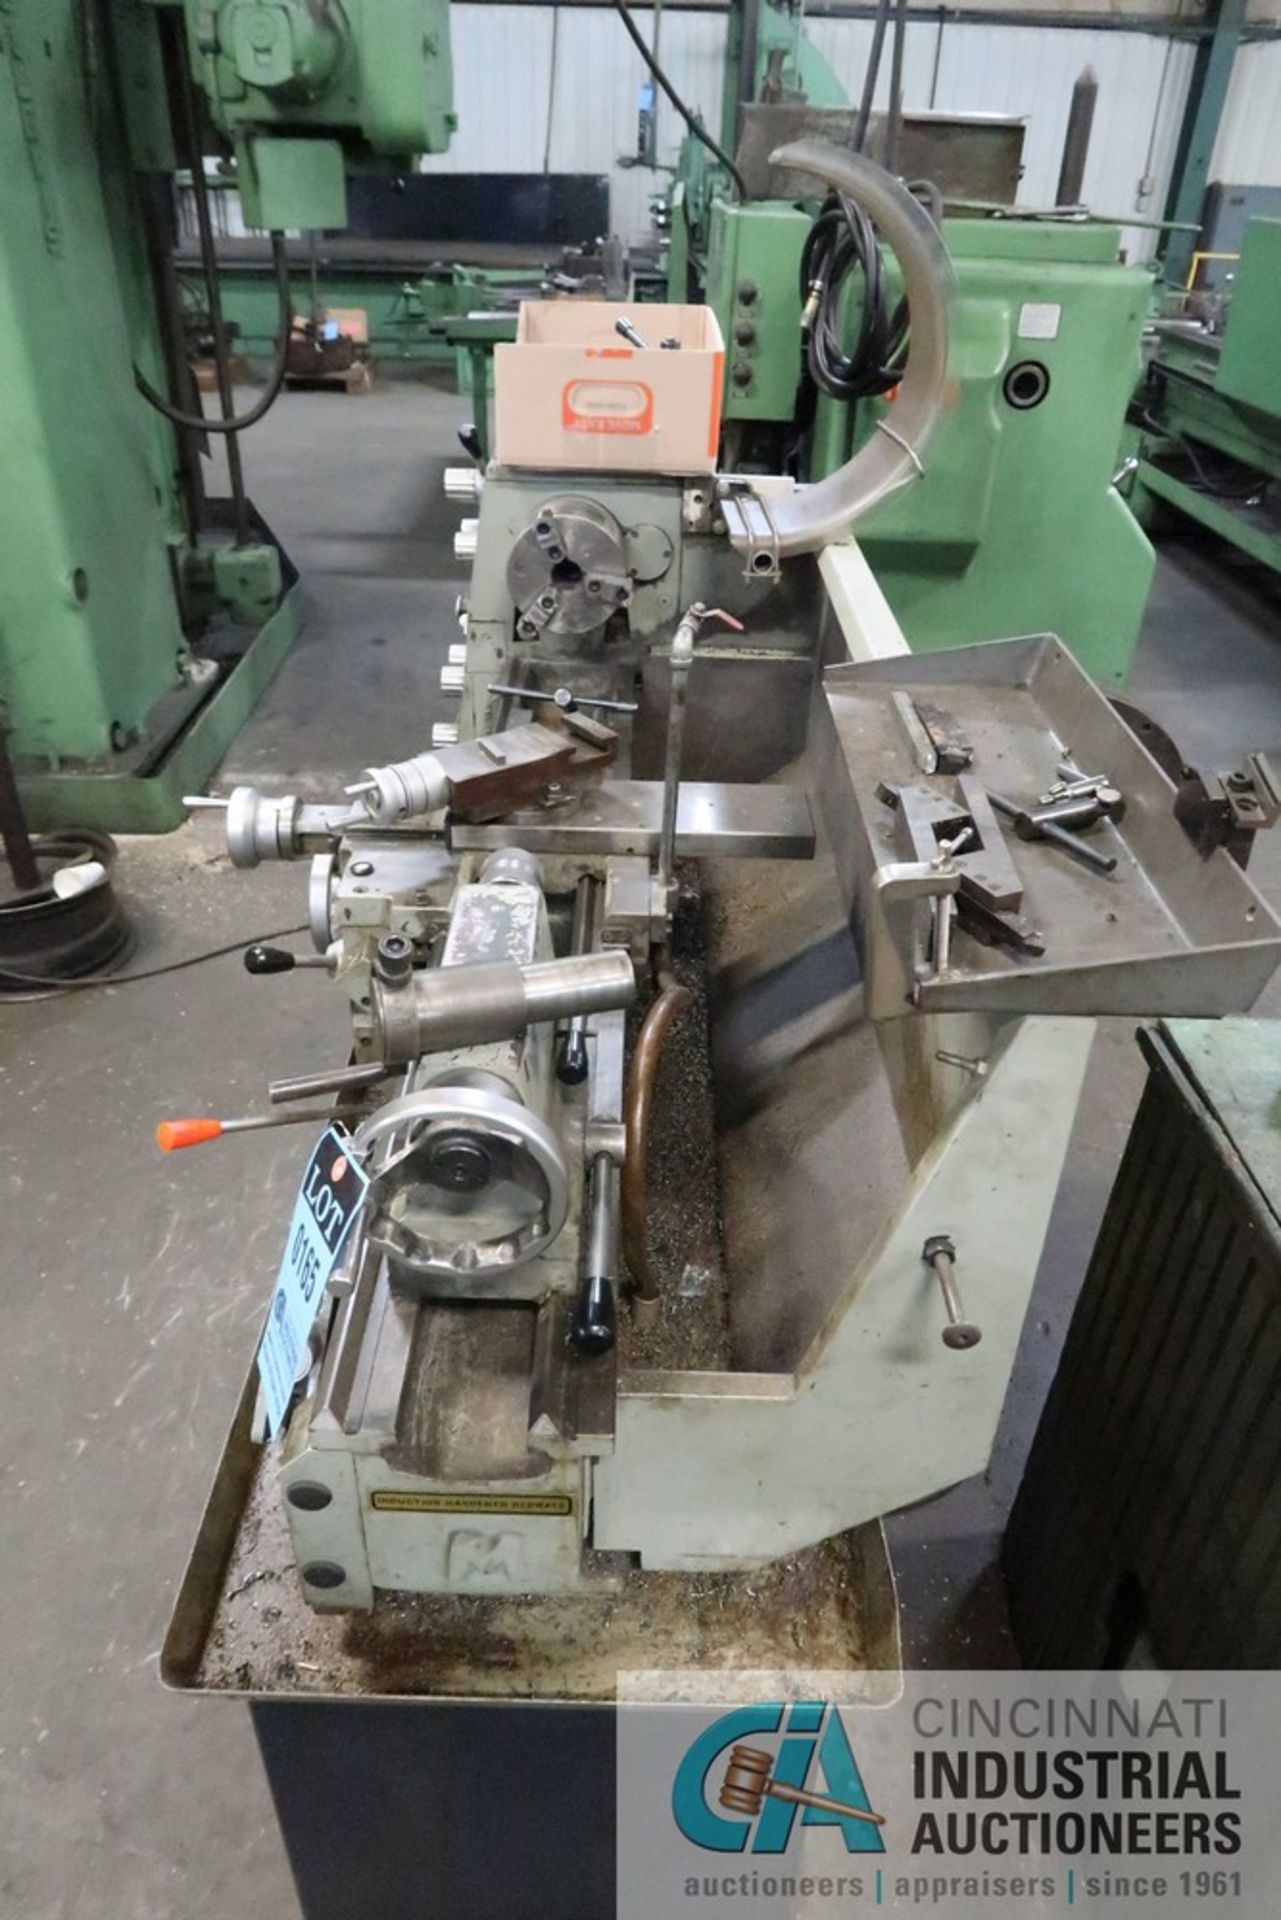 13" X 40" DASHIN PRINCE LATHE; S/N 7421, 1-1/4" SPINDLE HOLE, 8" 3-JAW CHUCK, STEADY AND FOLLOW - Image 11 of 11